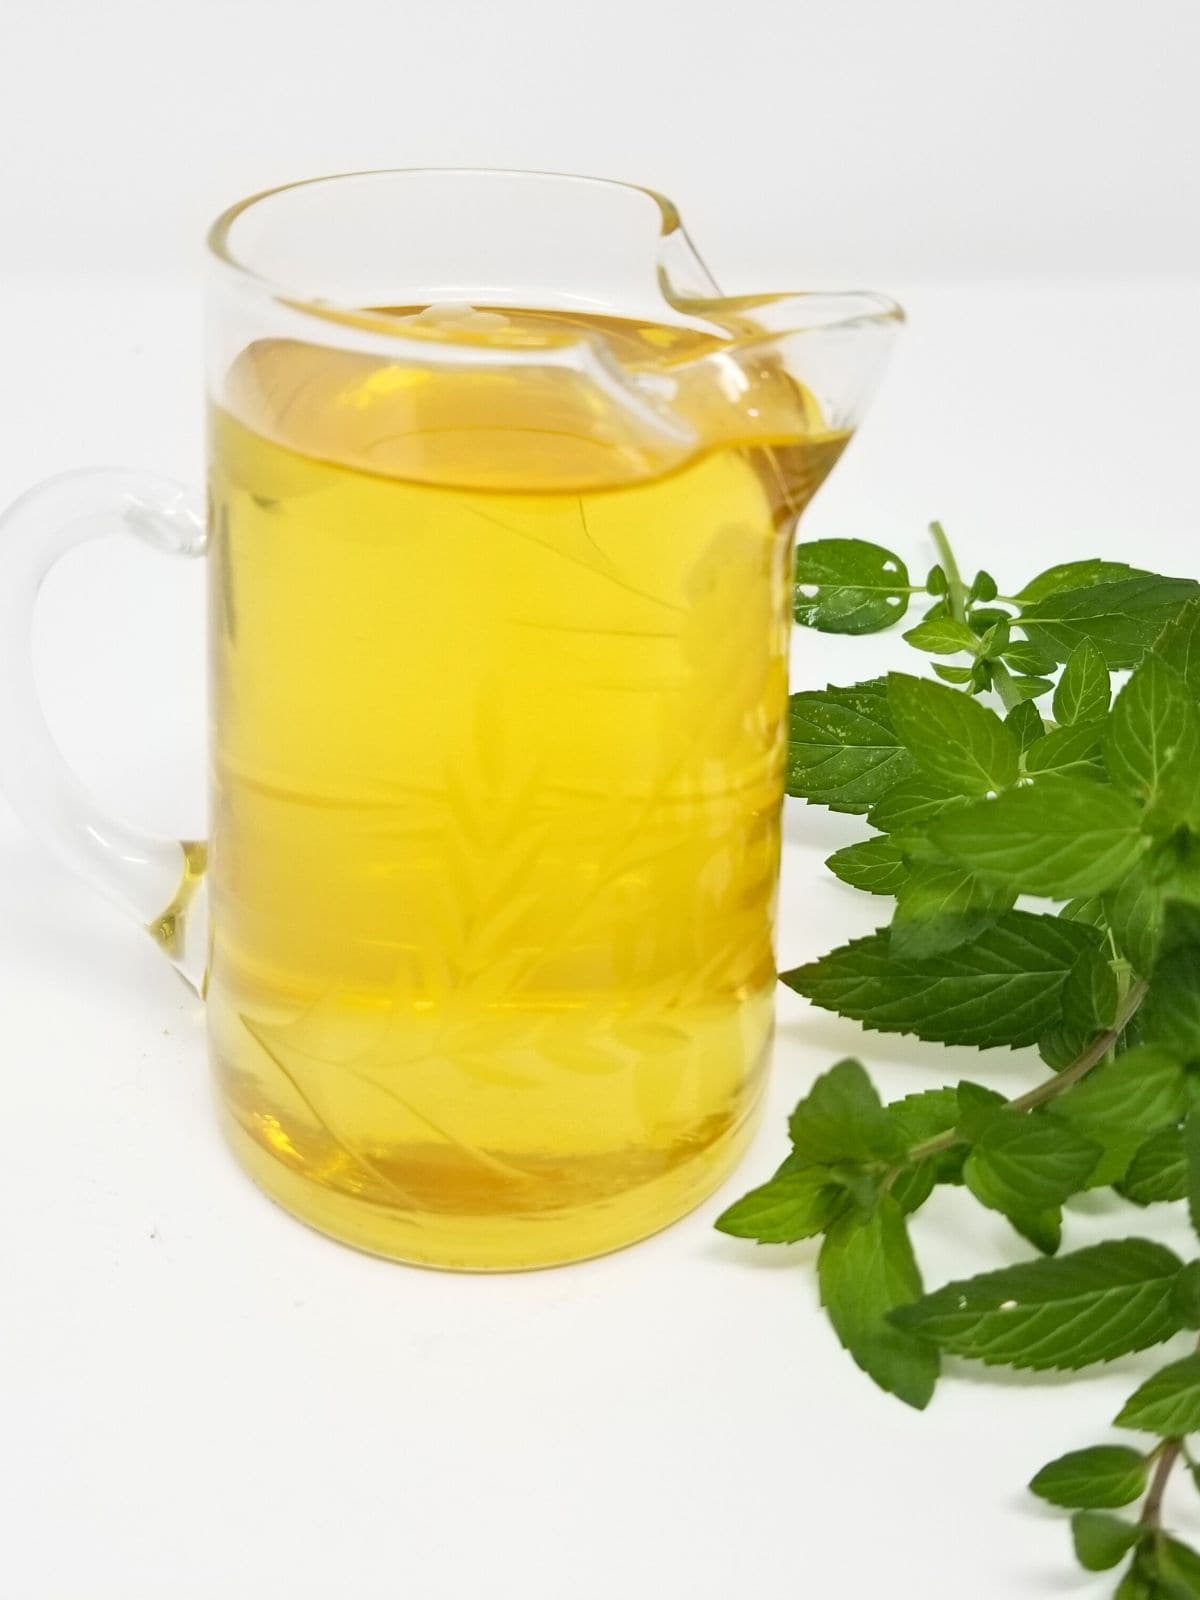 homemade peppermint syrup, made with fresh peppermint leaves, in a glass container.